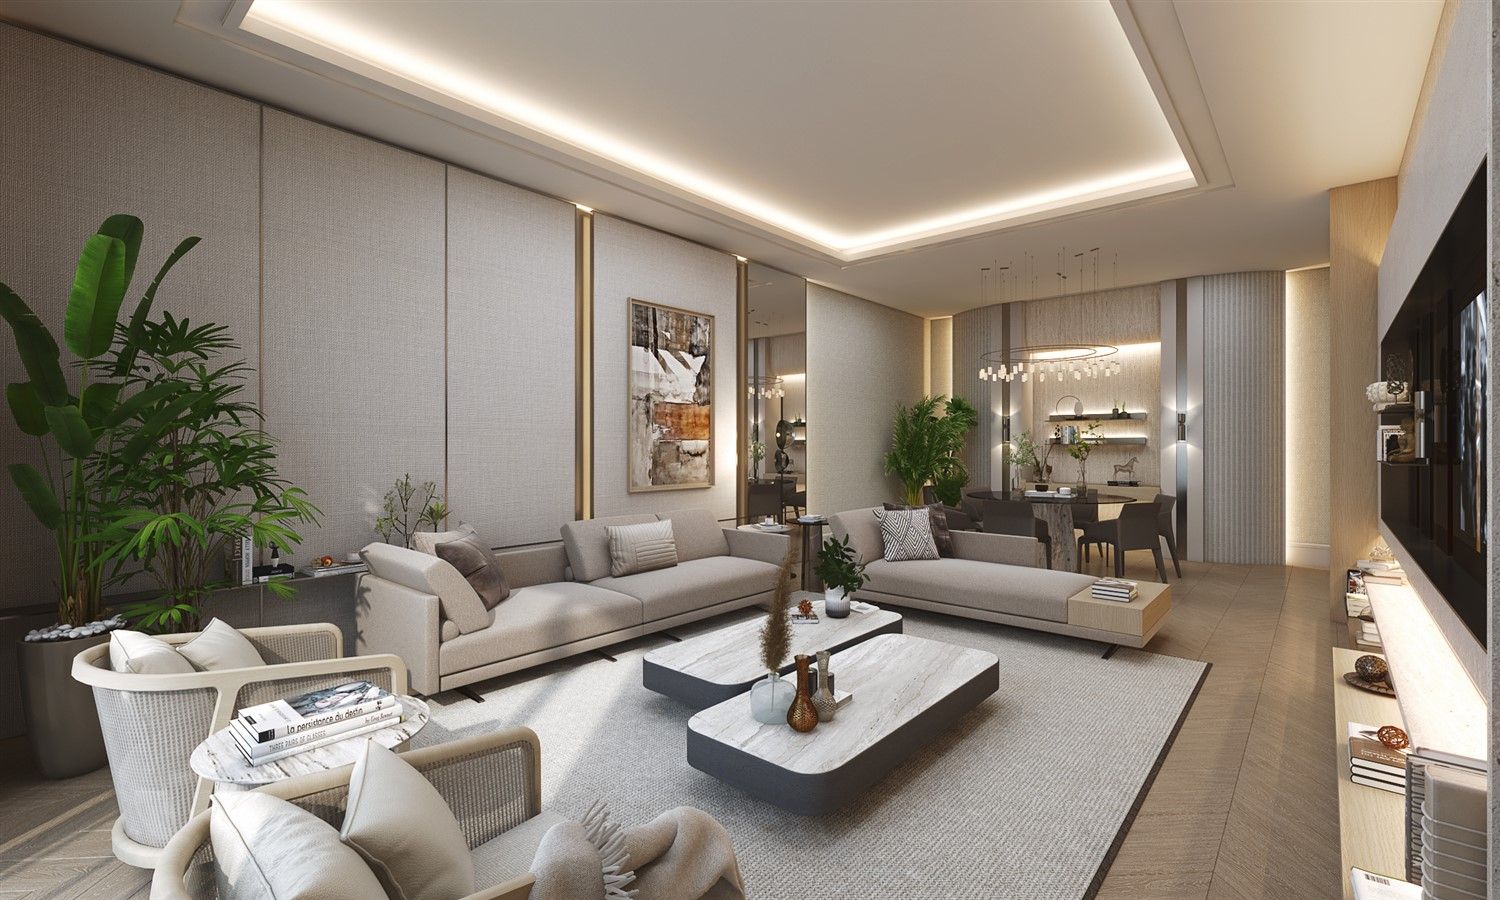 Elite large-scale residential complex with five-star hotel concept - Istanbul